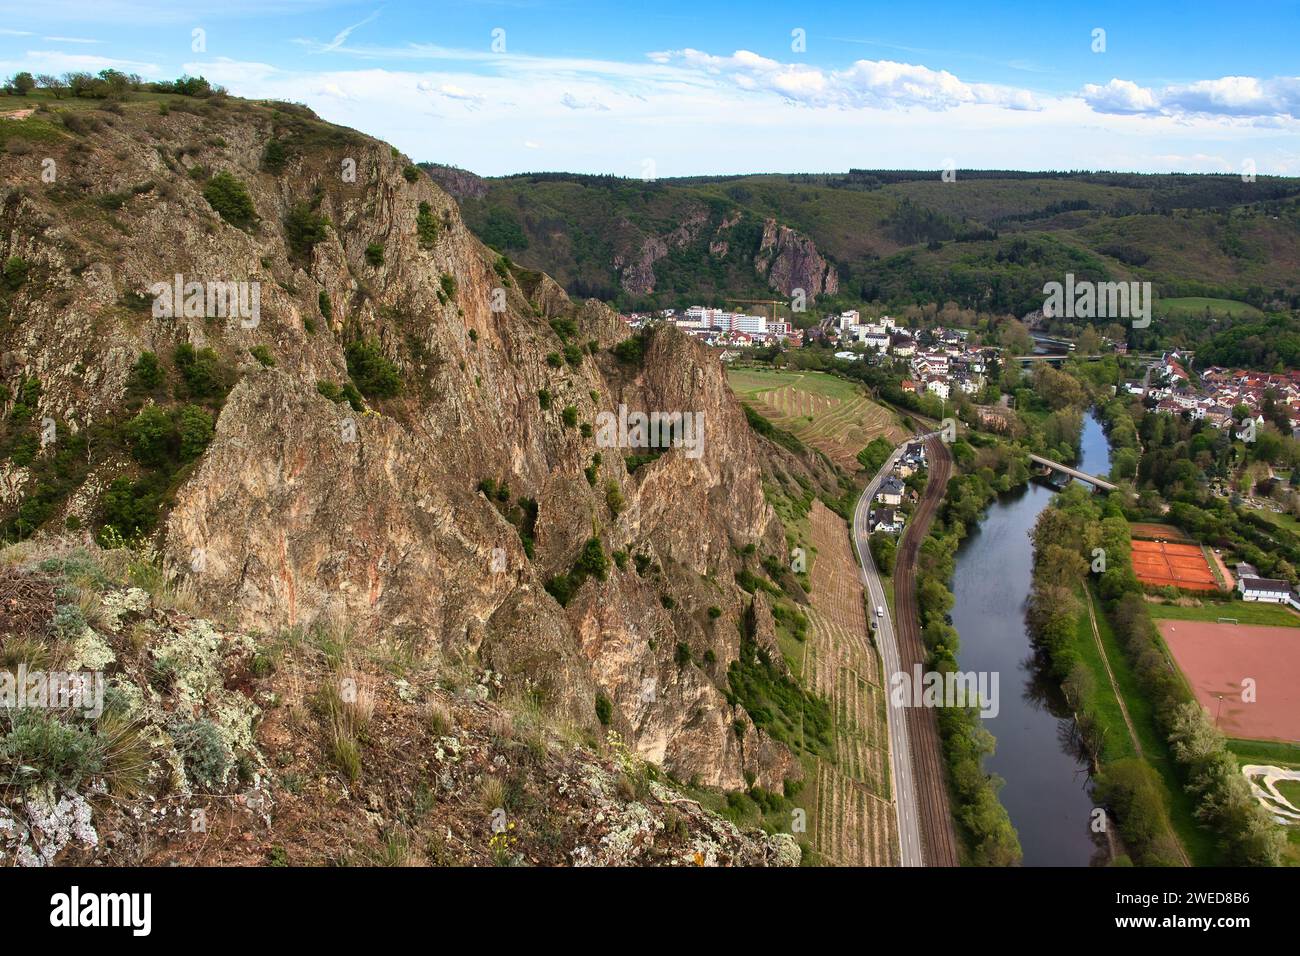 Bad Munster, Germany - May 9, 2021: Nahe River below a cliff at Rotenfels on a spring day in Bad Munster, Germany Stock Photo